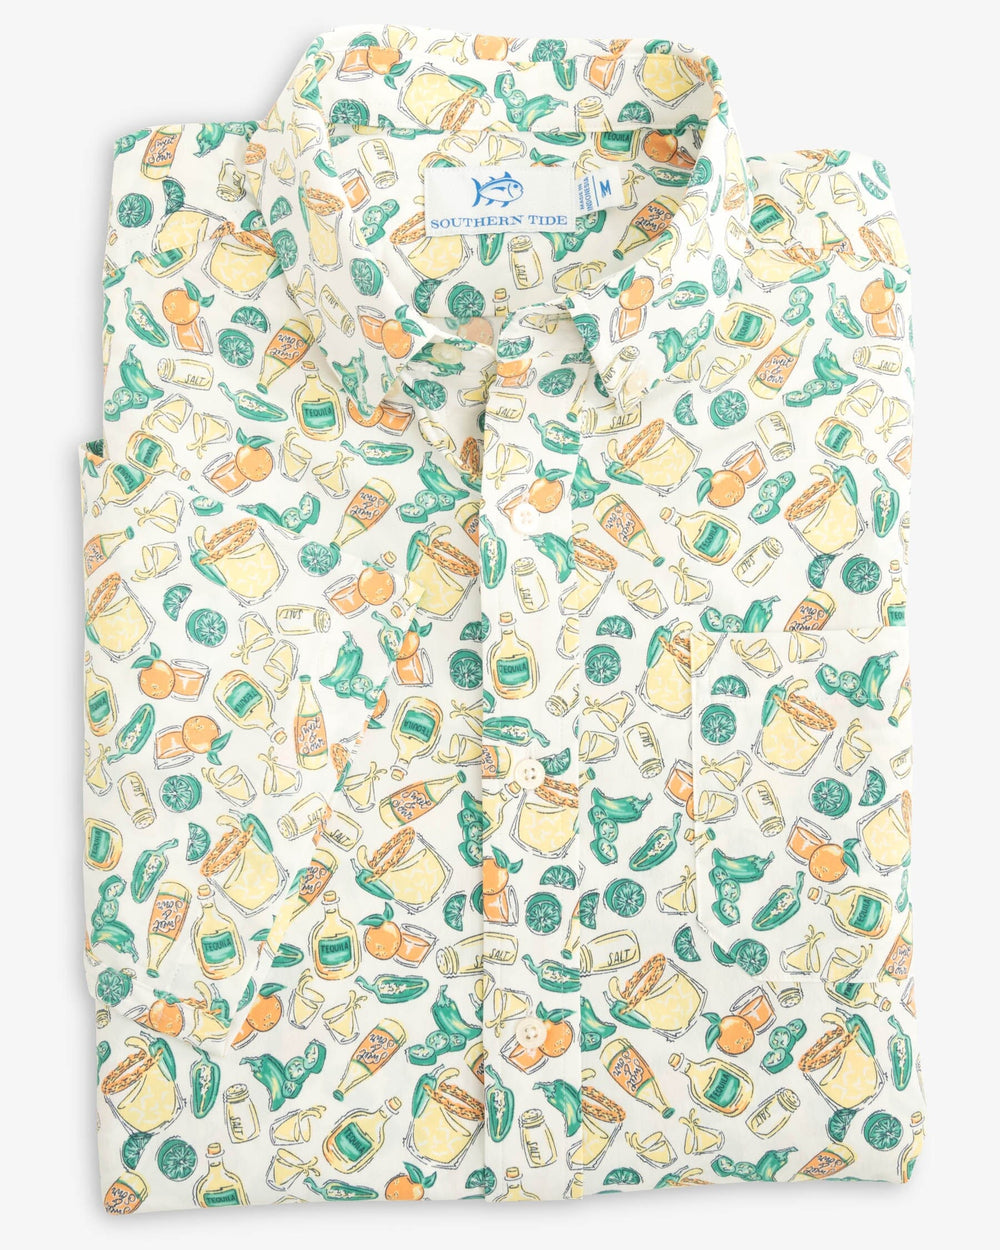 The folded view of the Southern Tide Marg Madness Intercoastal Short Sleeve Button Down Shirt by Southern Tide - Classic White